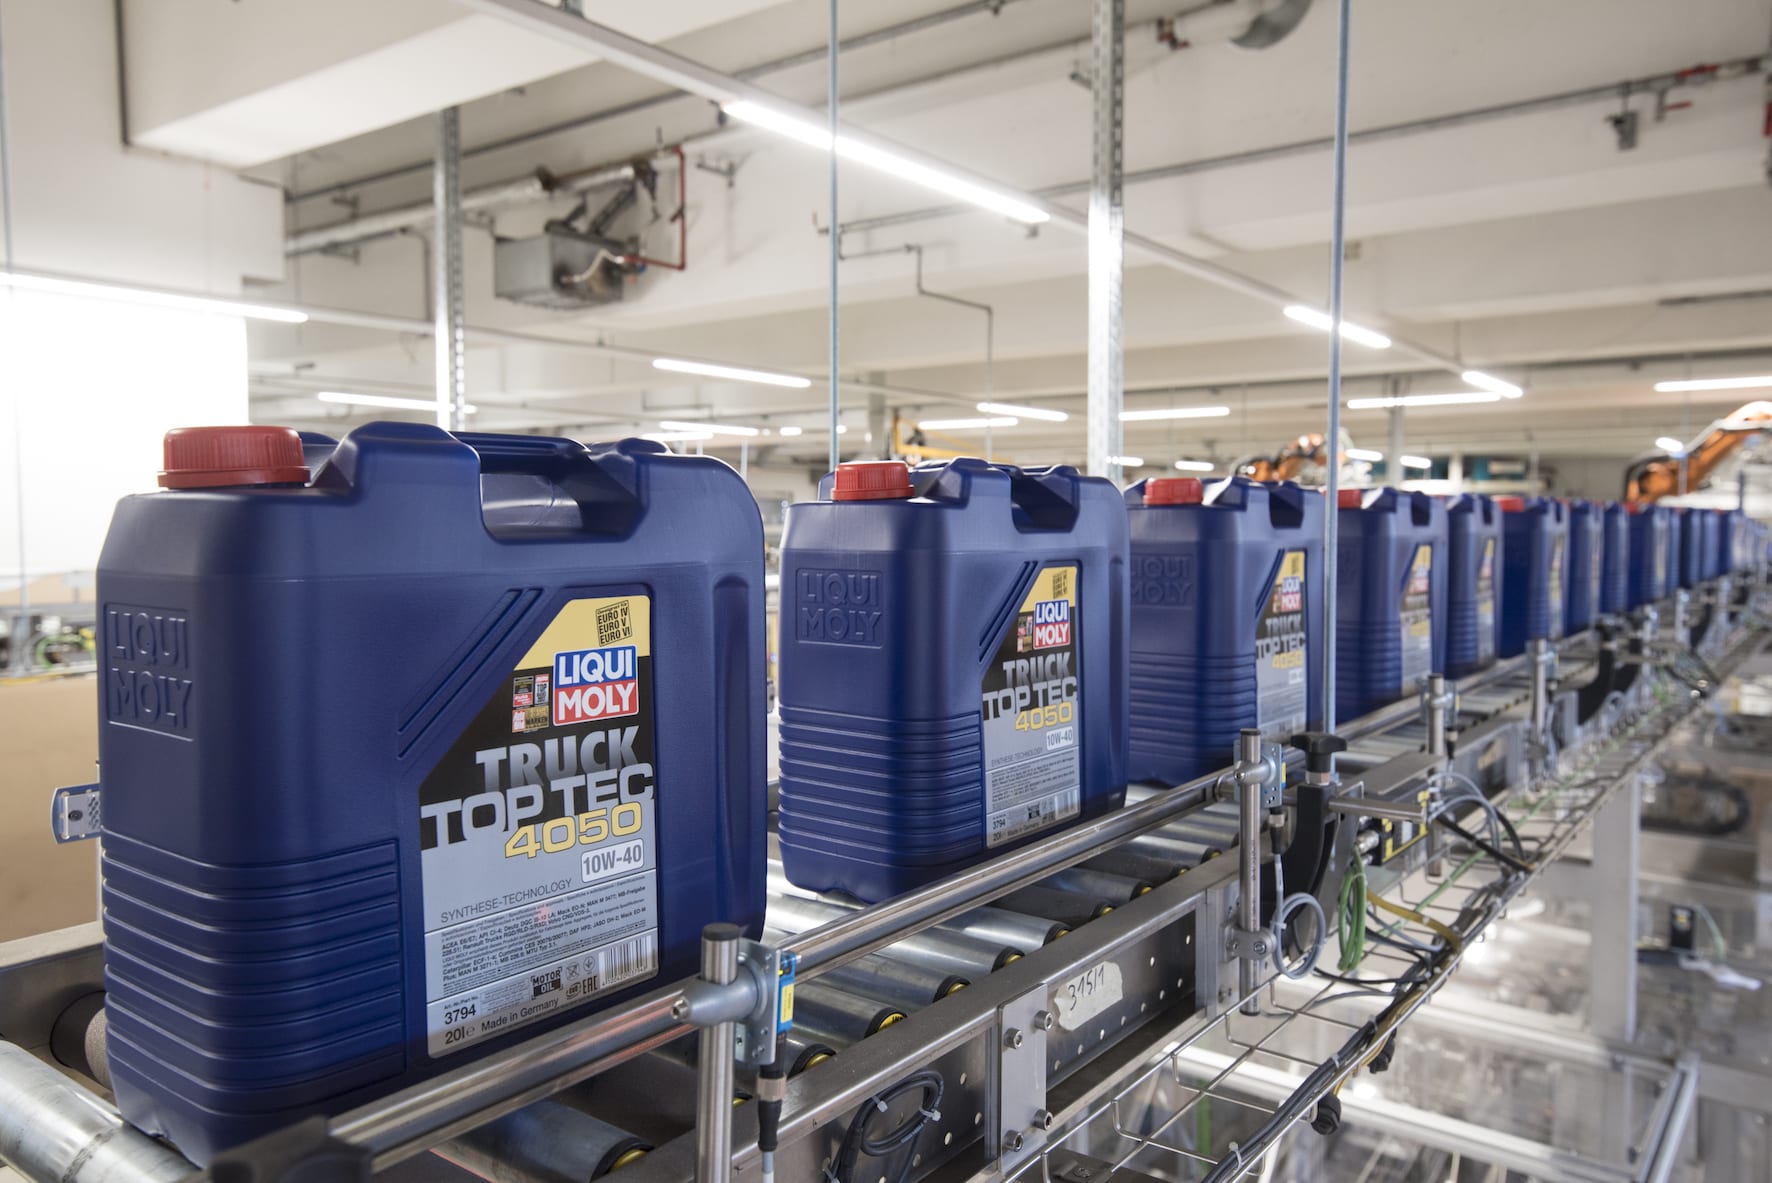 New warehouse aims to improve Liqui Moly deliveries